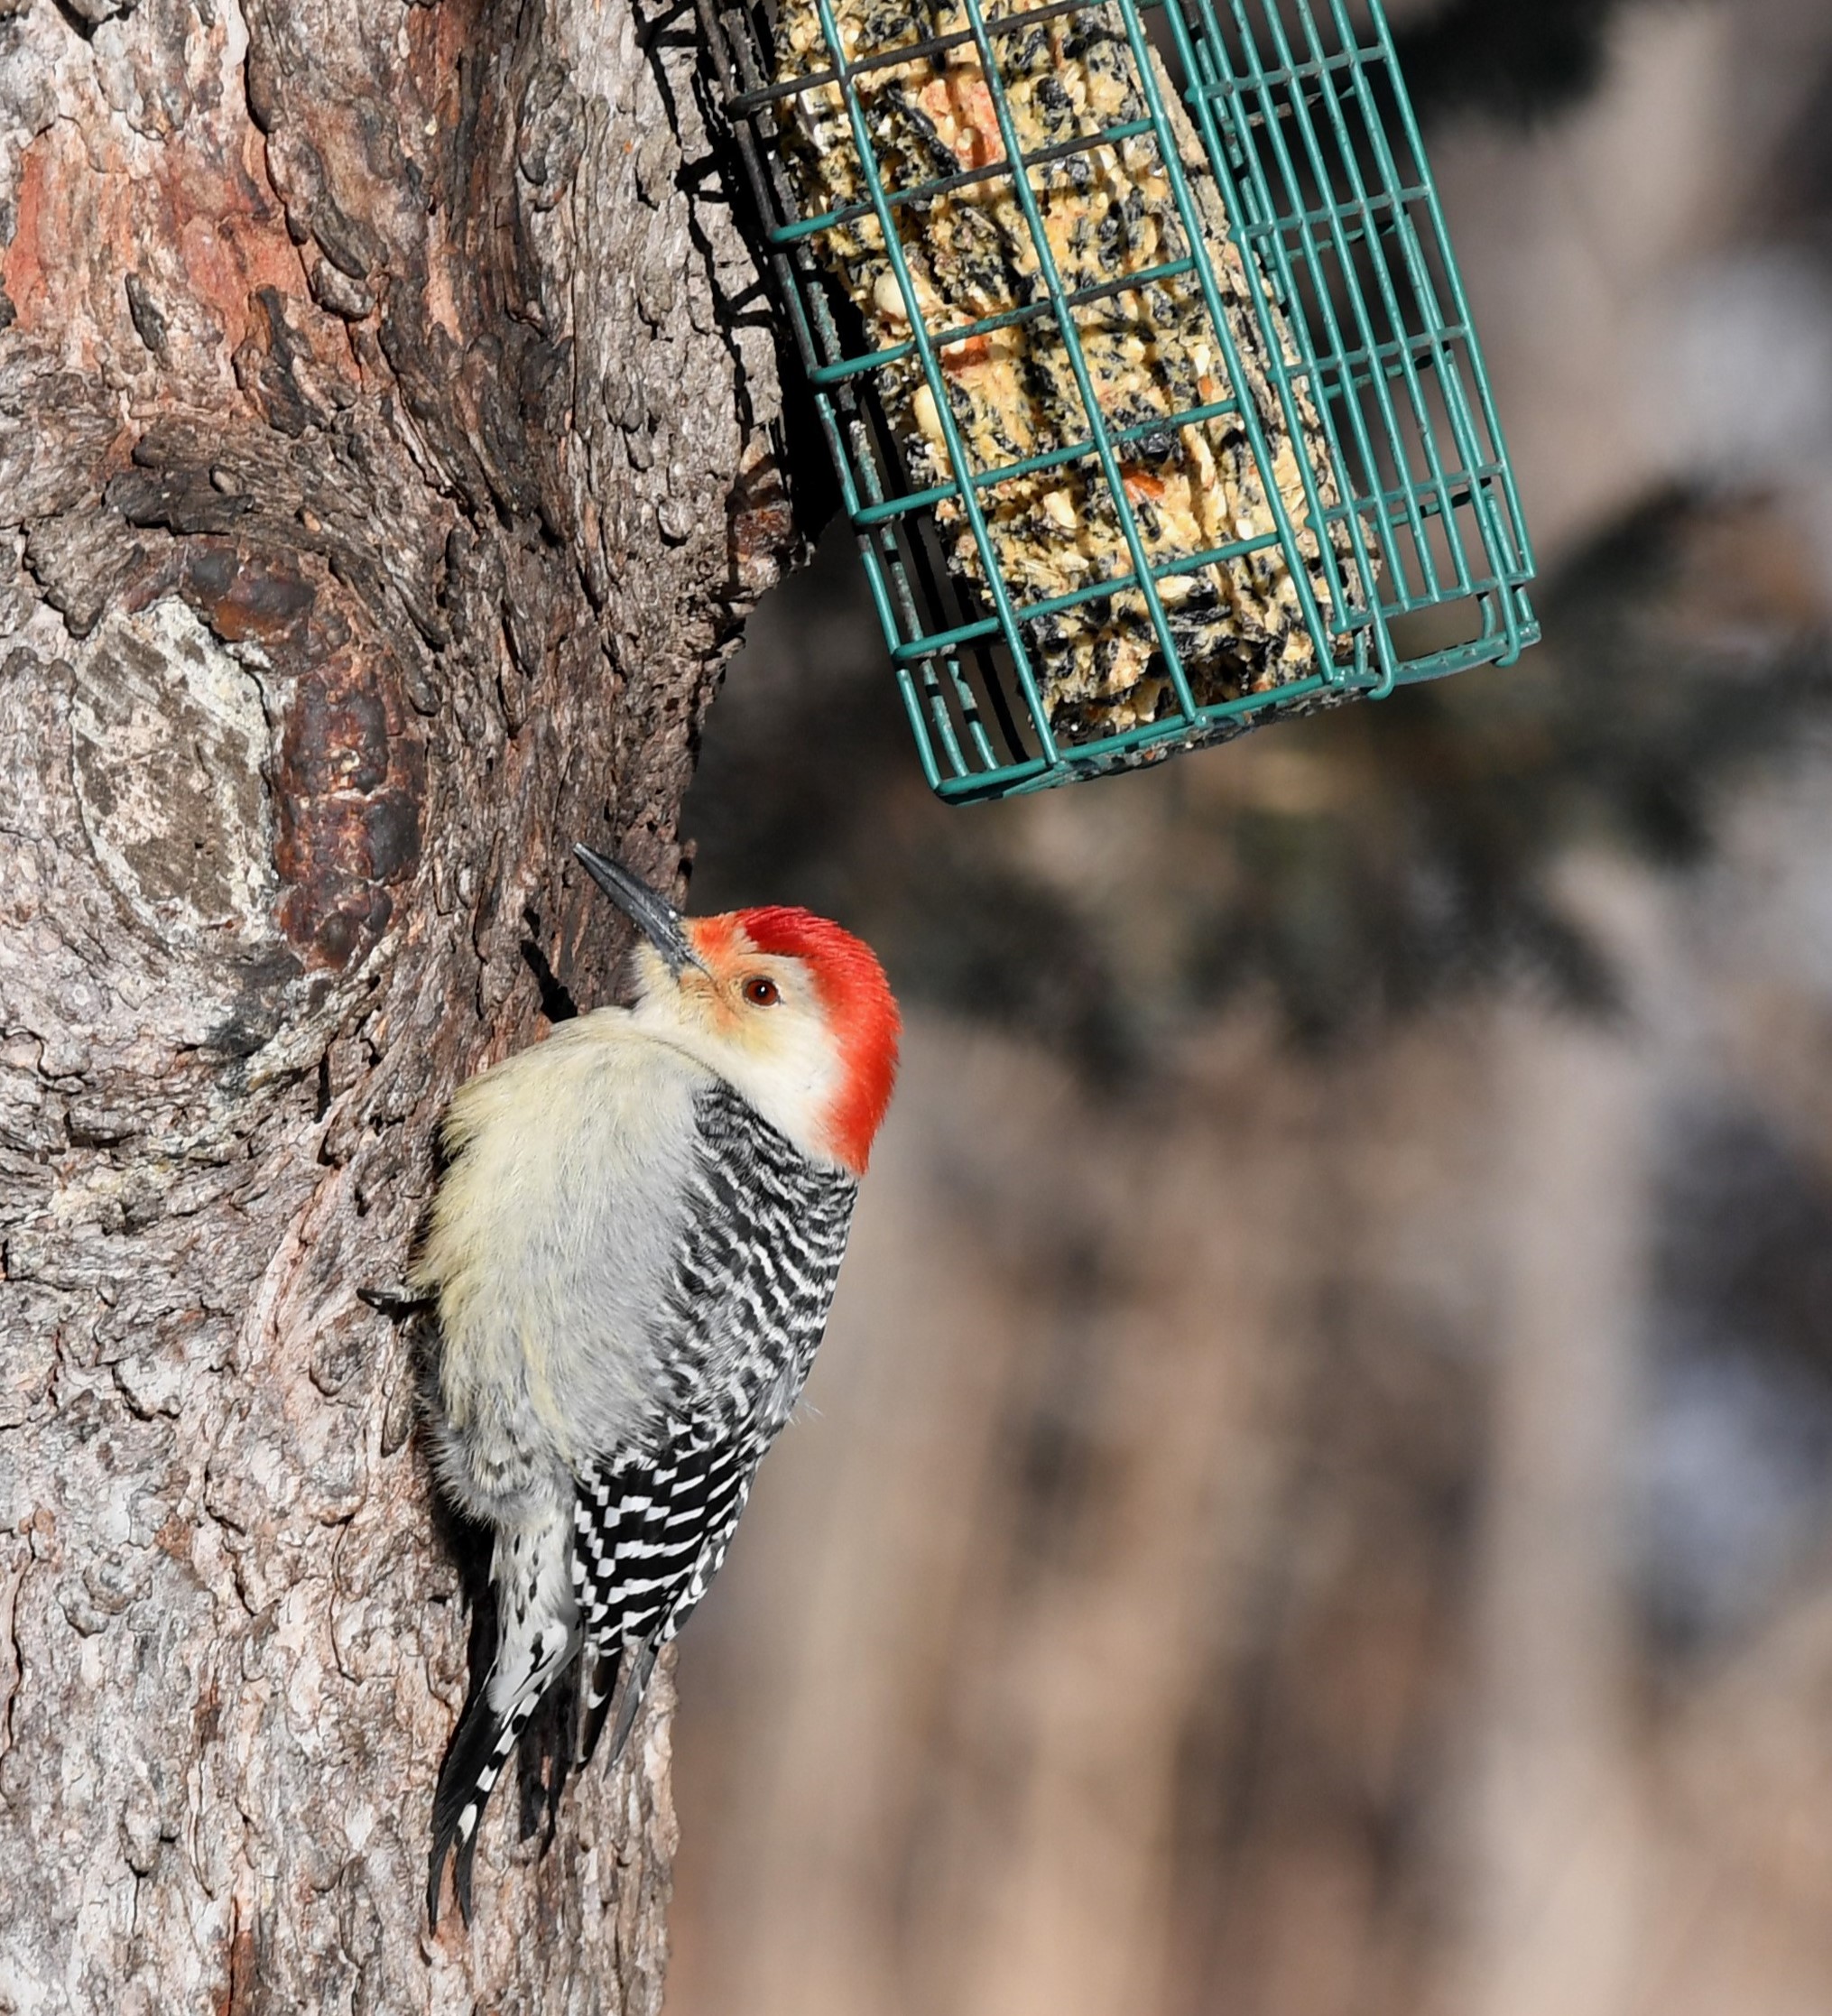 Bird with red crown (indicating male), tight white and black stripes in back and fluffy light grey breast, clings to a tree trunk, inspecting the suet feeder overhead. Red Bellied Woodpecker.